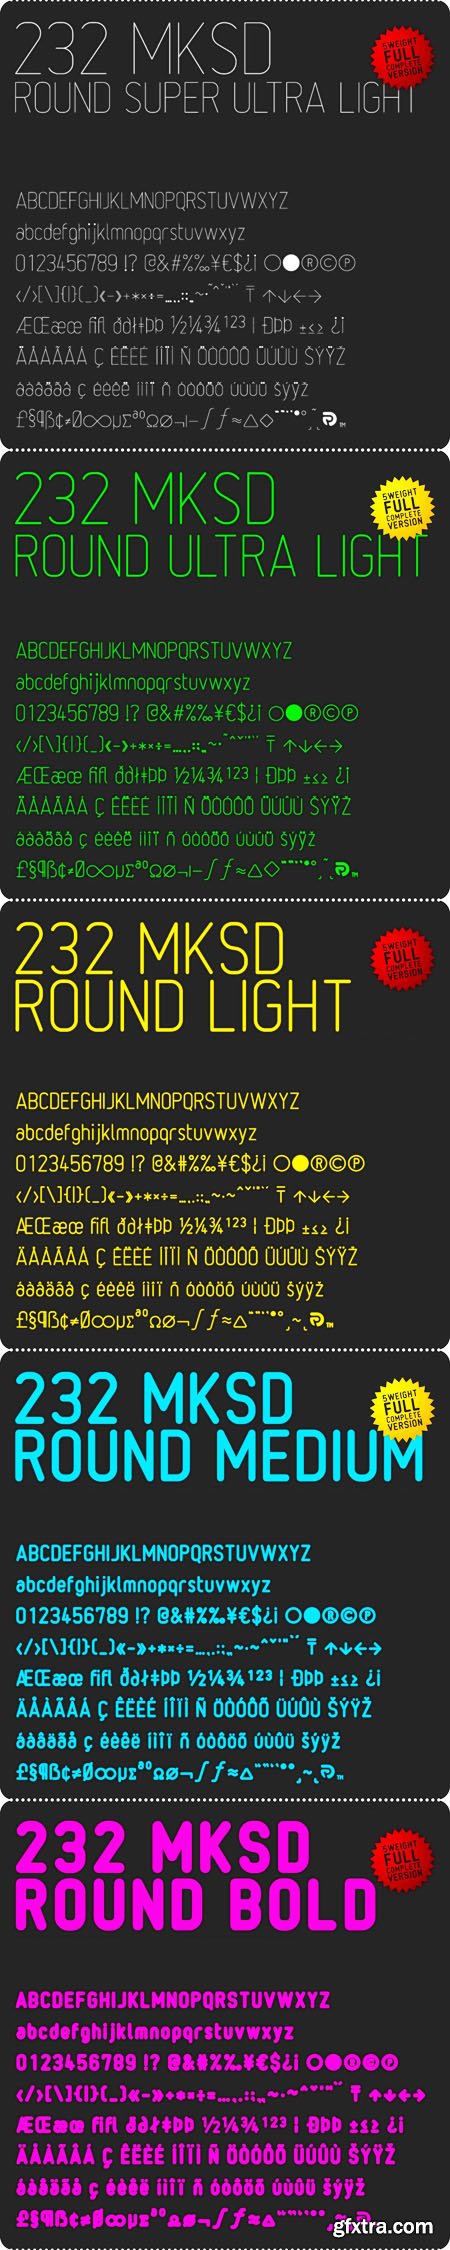 232MKSD Round - 5 Fonts